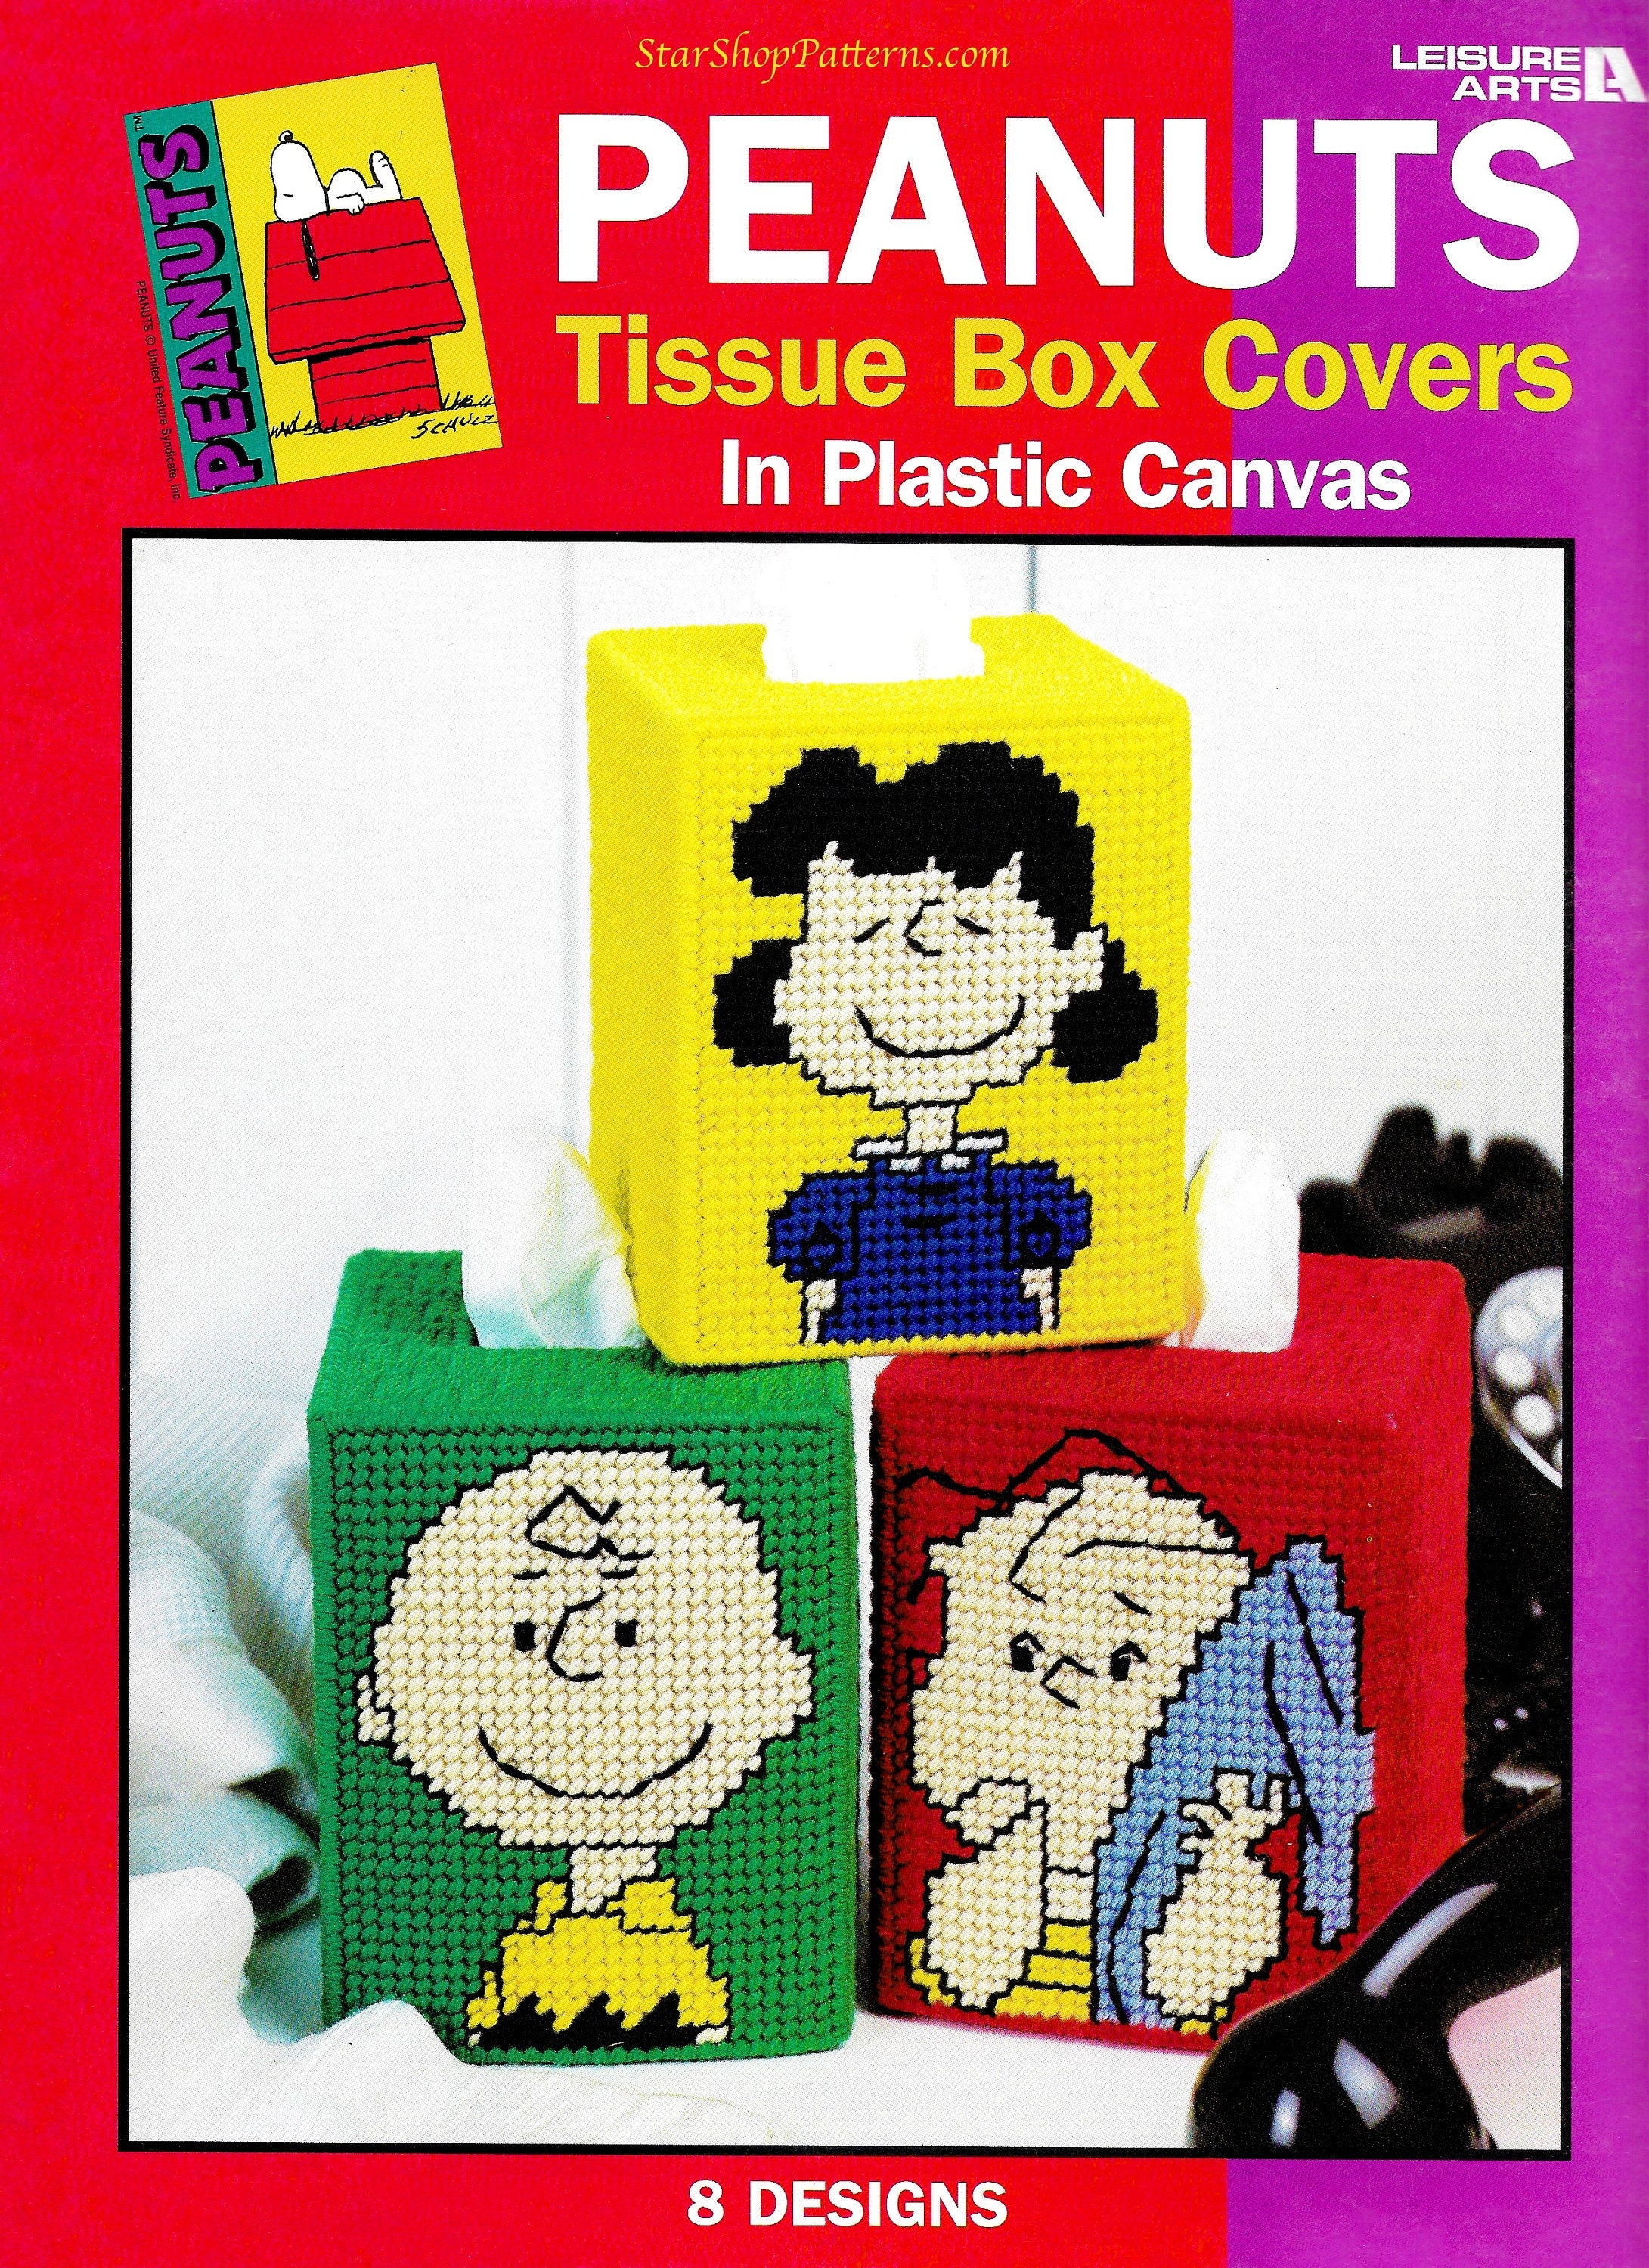 Plastic Canvas Crayon Boxes to carry tiny toy cars or crayons!  Plastic  canvas stitches, Plastic canvas books, Plastic canvas patterns